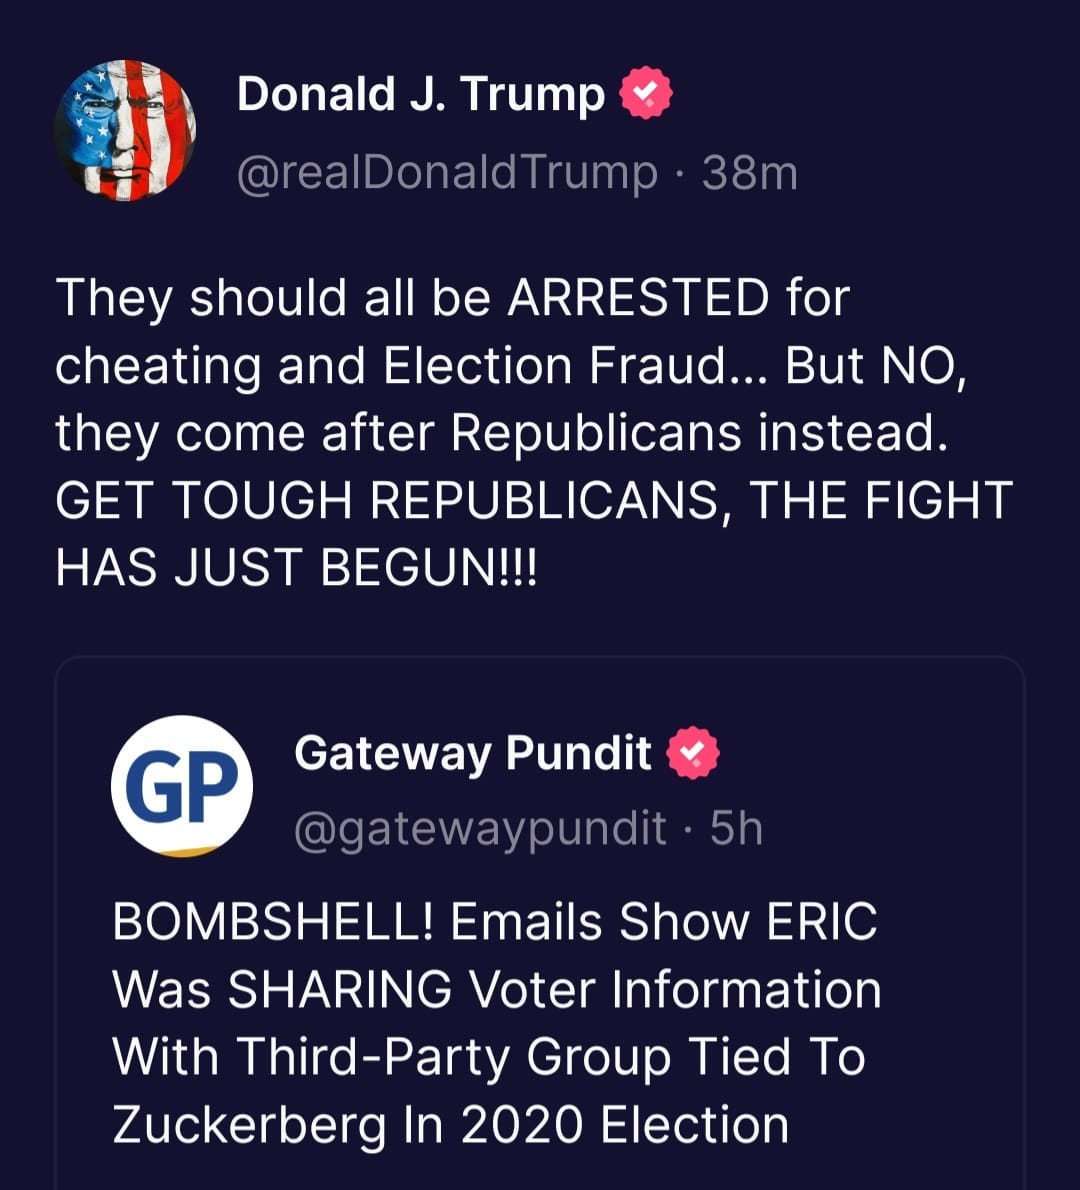 May be a Twitter screenshot of text that says 'Donald J. Trump @realDonaldTrump Trump 38m They should all be ARRESTED for cheating and Election Fraud... But NO, they come after Republicans instead. GET TOUGH REPUBLICANS THE FIGHT HAS JUST BEGUN!!! GP Gateway Pundit @gatewaypundit 5h BOMBSHELL! Emails Show ERIC Was SHARING Voter Information With Third Third-Party Group Tied Το Zuckerberg In 2020 Election'